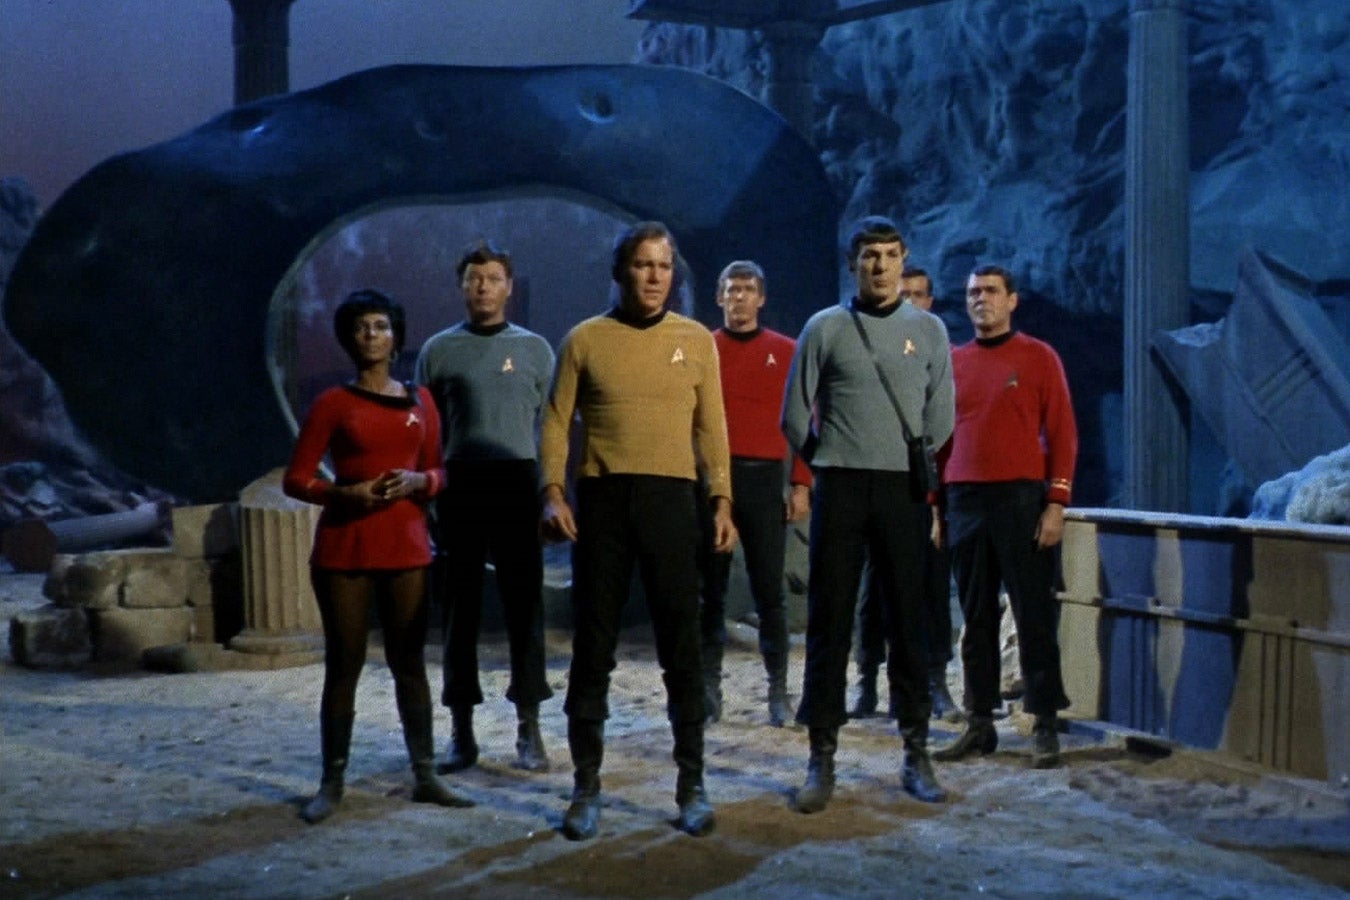 The original cast of Star Trek, in red, teal, and yellow uniforms.